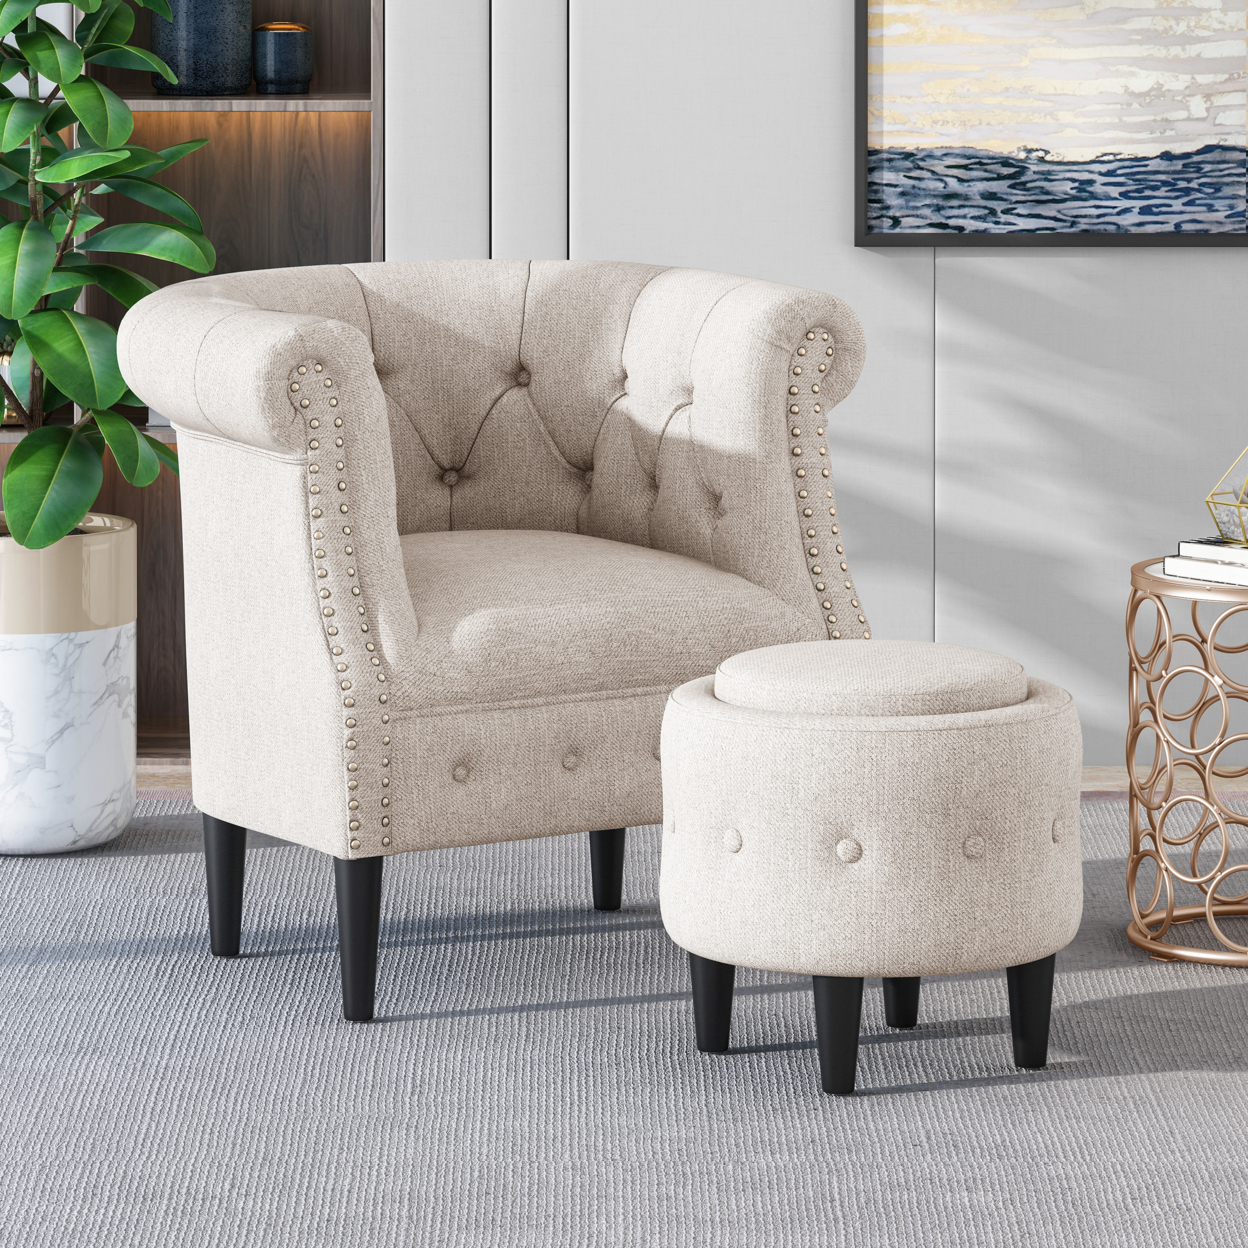 Leila Petite Tufted Fabric Chair And Ottoman Set - Beige + Dark Brown